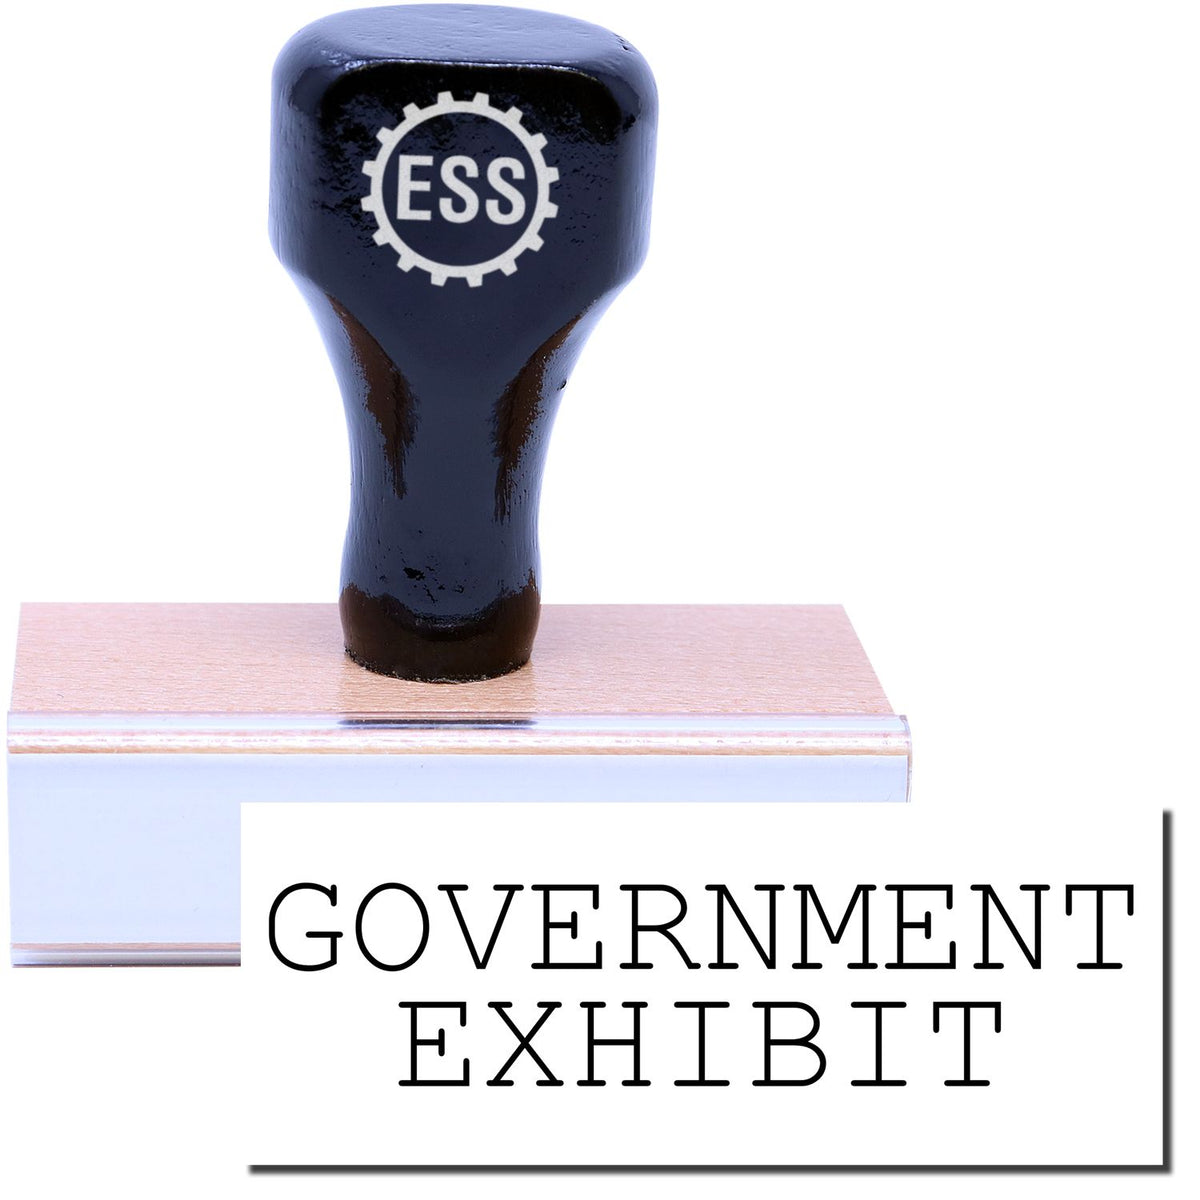 A stock office rubber stamp with a stamped image showing how the text &quot;GOVERNMENT EXHIBIT&quot; is displayed after stamping.